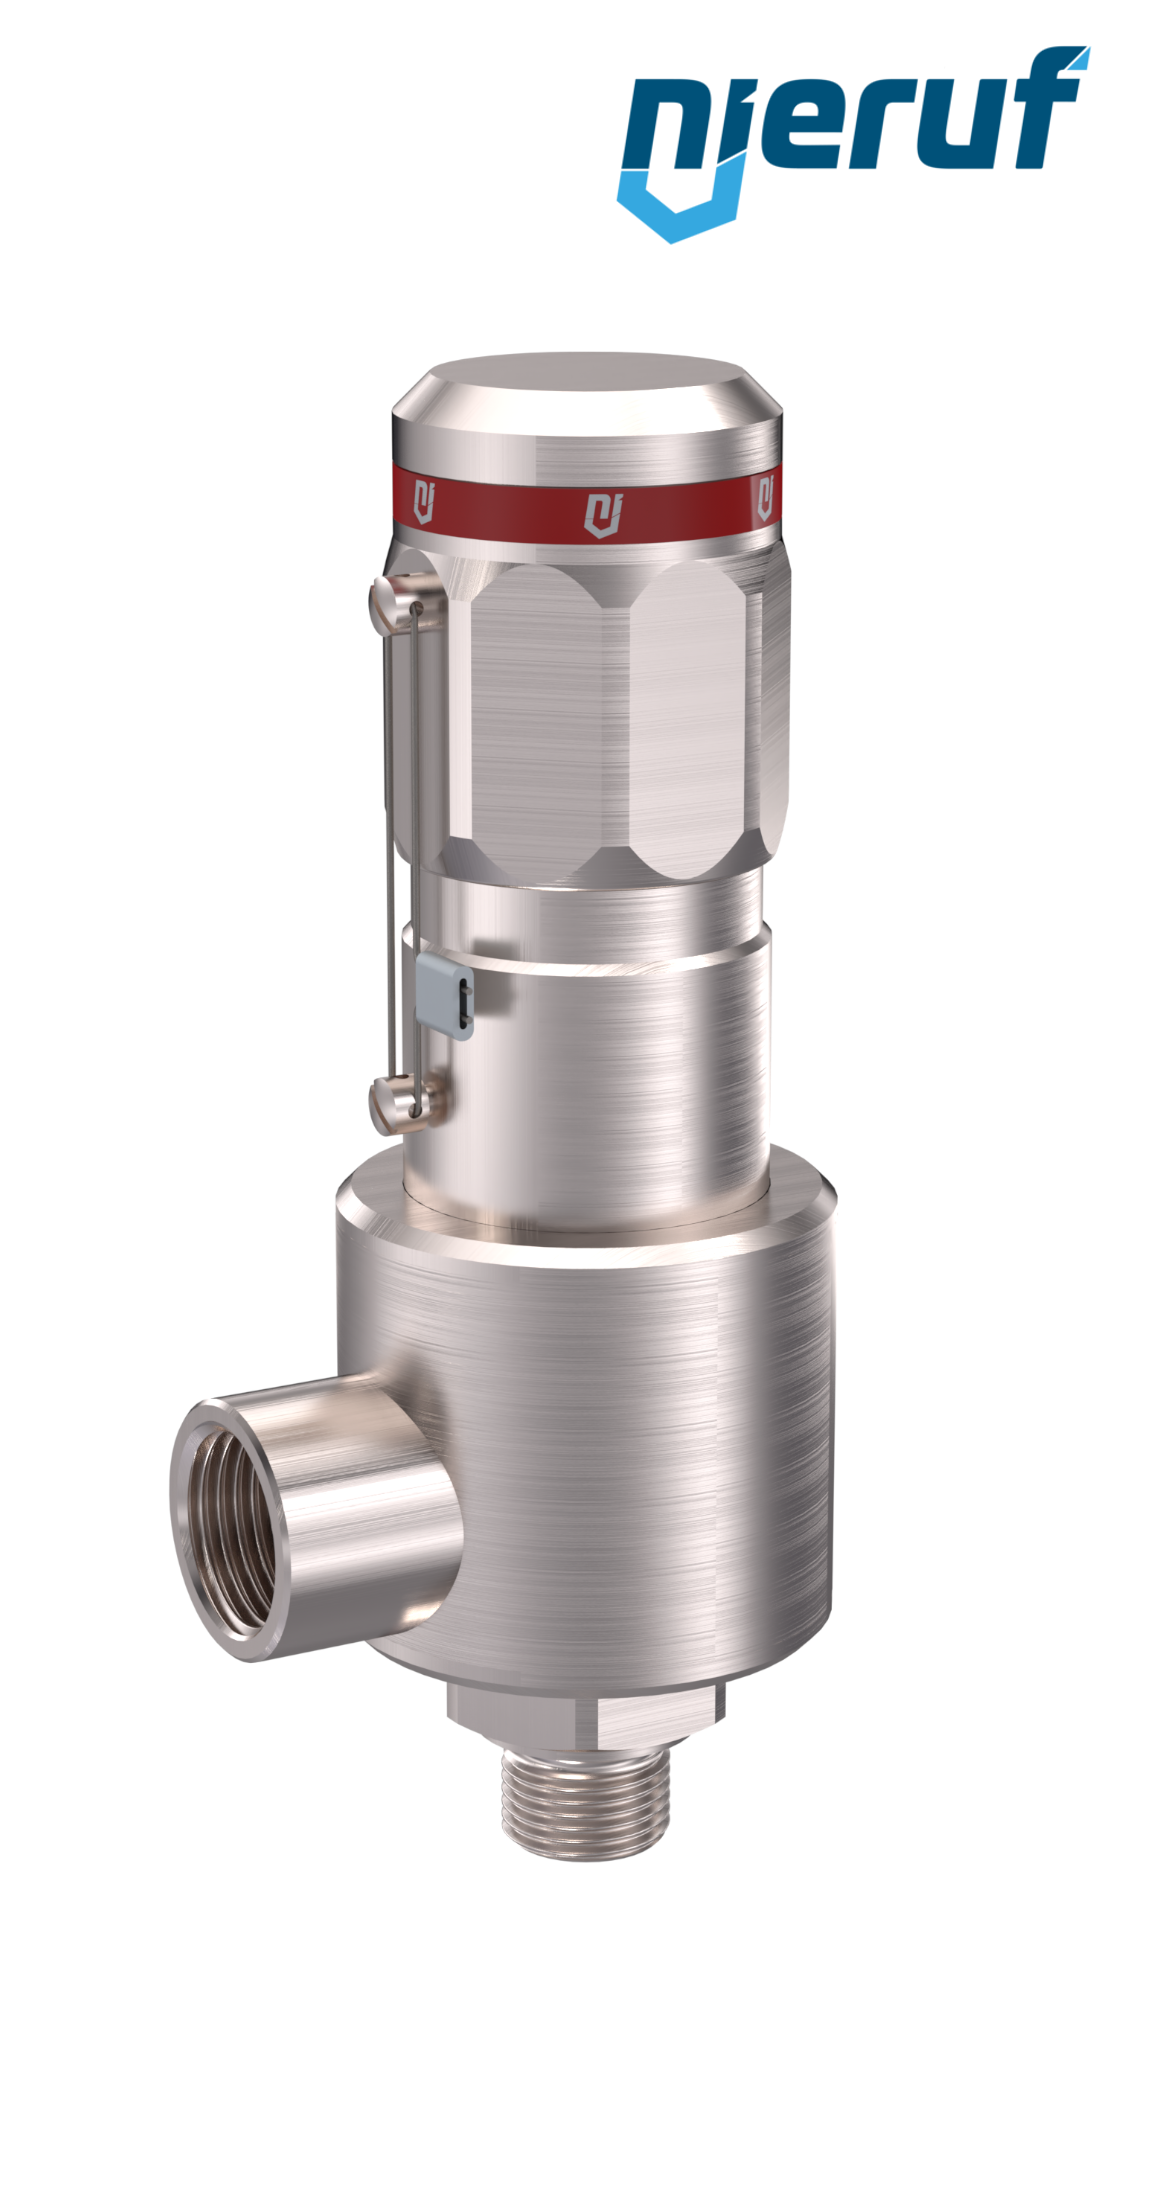 safety-valve DN8 1/4" m x 3/4" fm male thread NPT, SV15, MD/ PEEK, without lifting device, angle-type, 100,0 - 600,0 bar